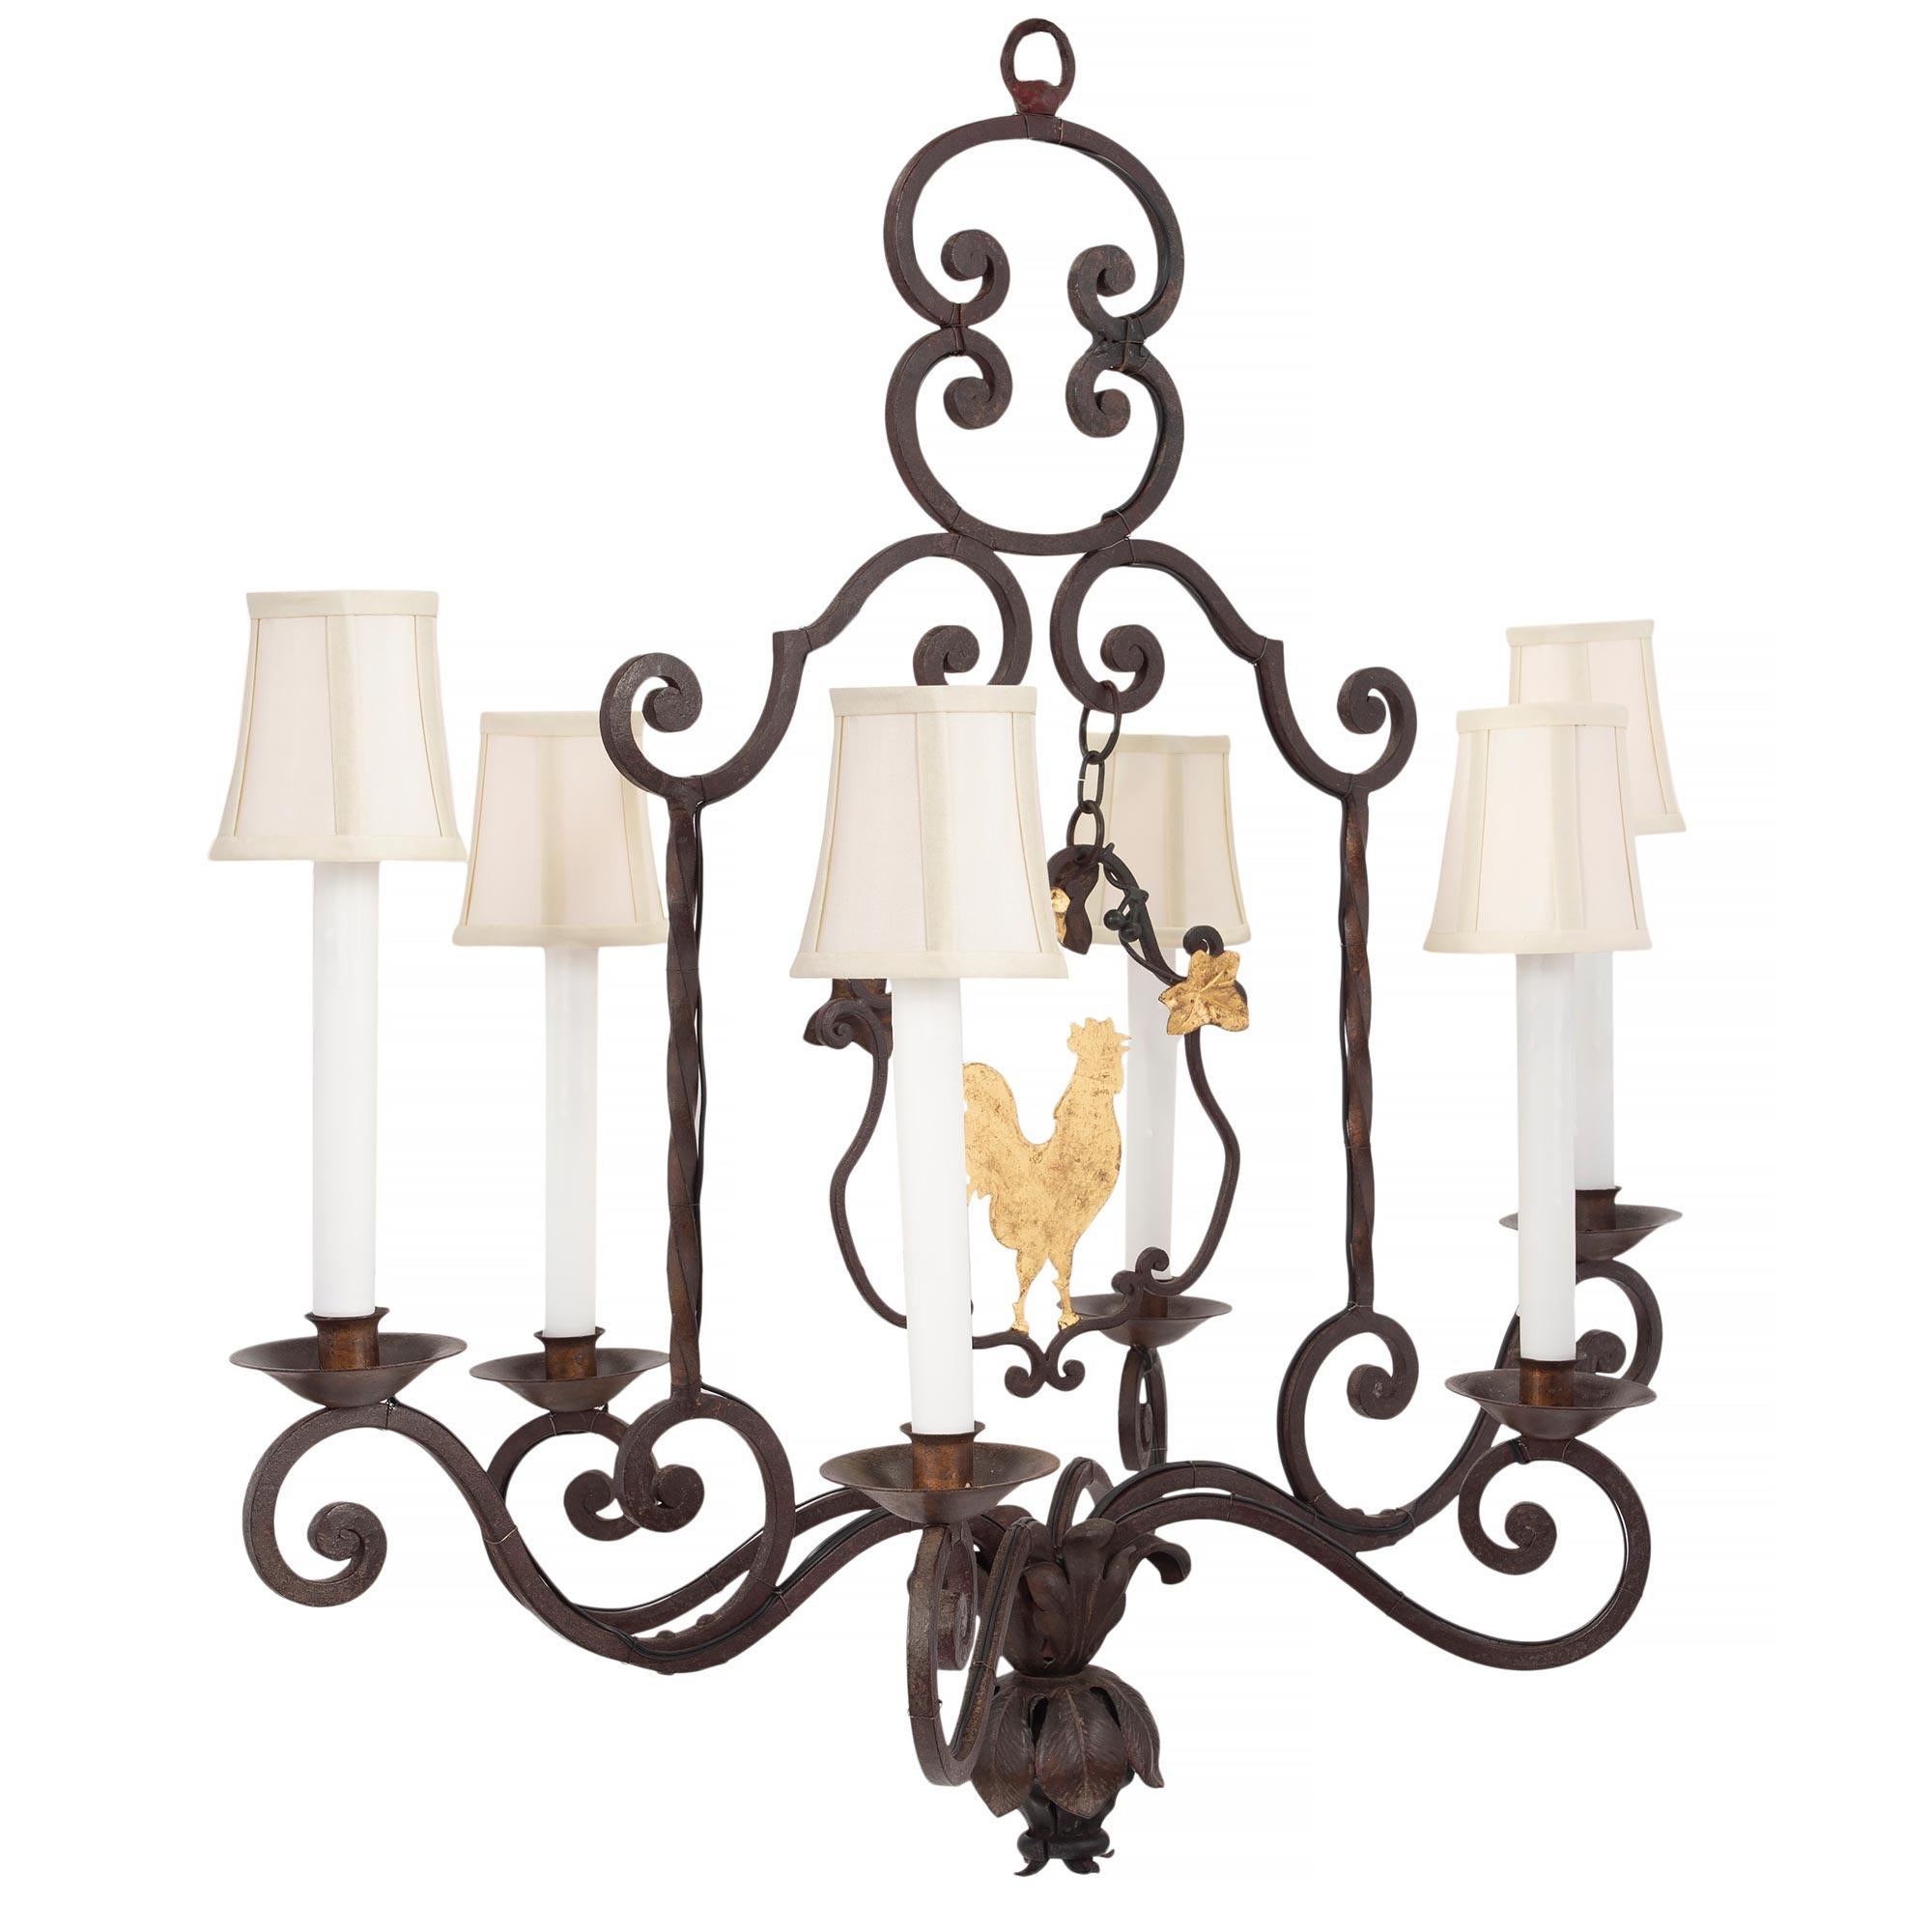 A charming French 19th century Louis XV st. patinated iron and gilt iron six light chandelier. The rectangular shaped chandelier has a wonderful scrolled top design. At the center is a charming hanging decoration of a gilt iron rooster with gilt